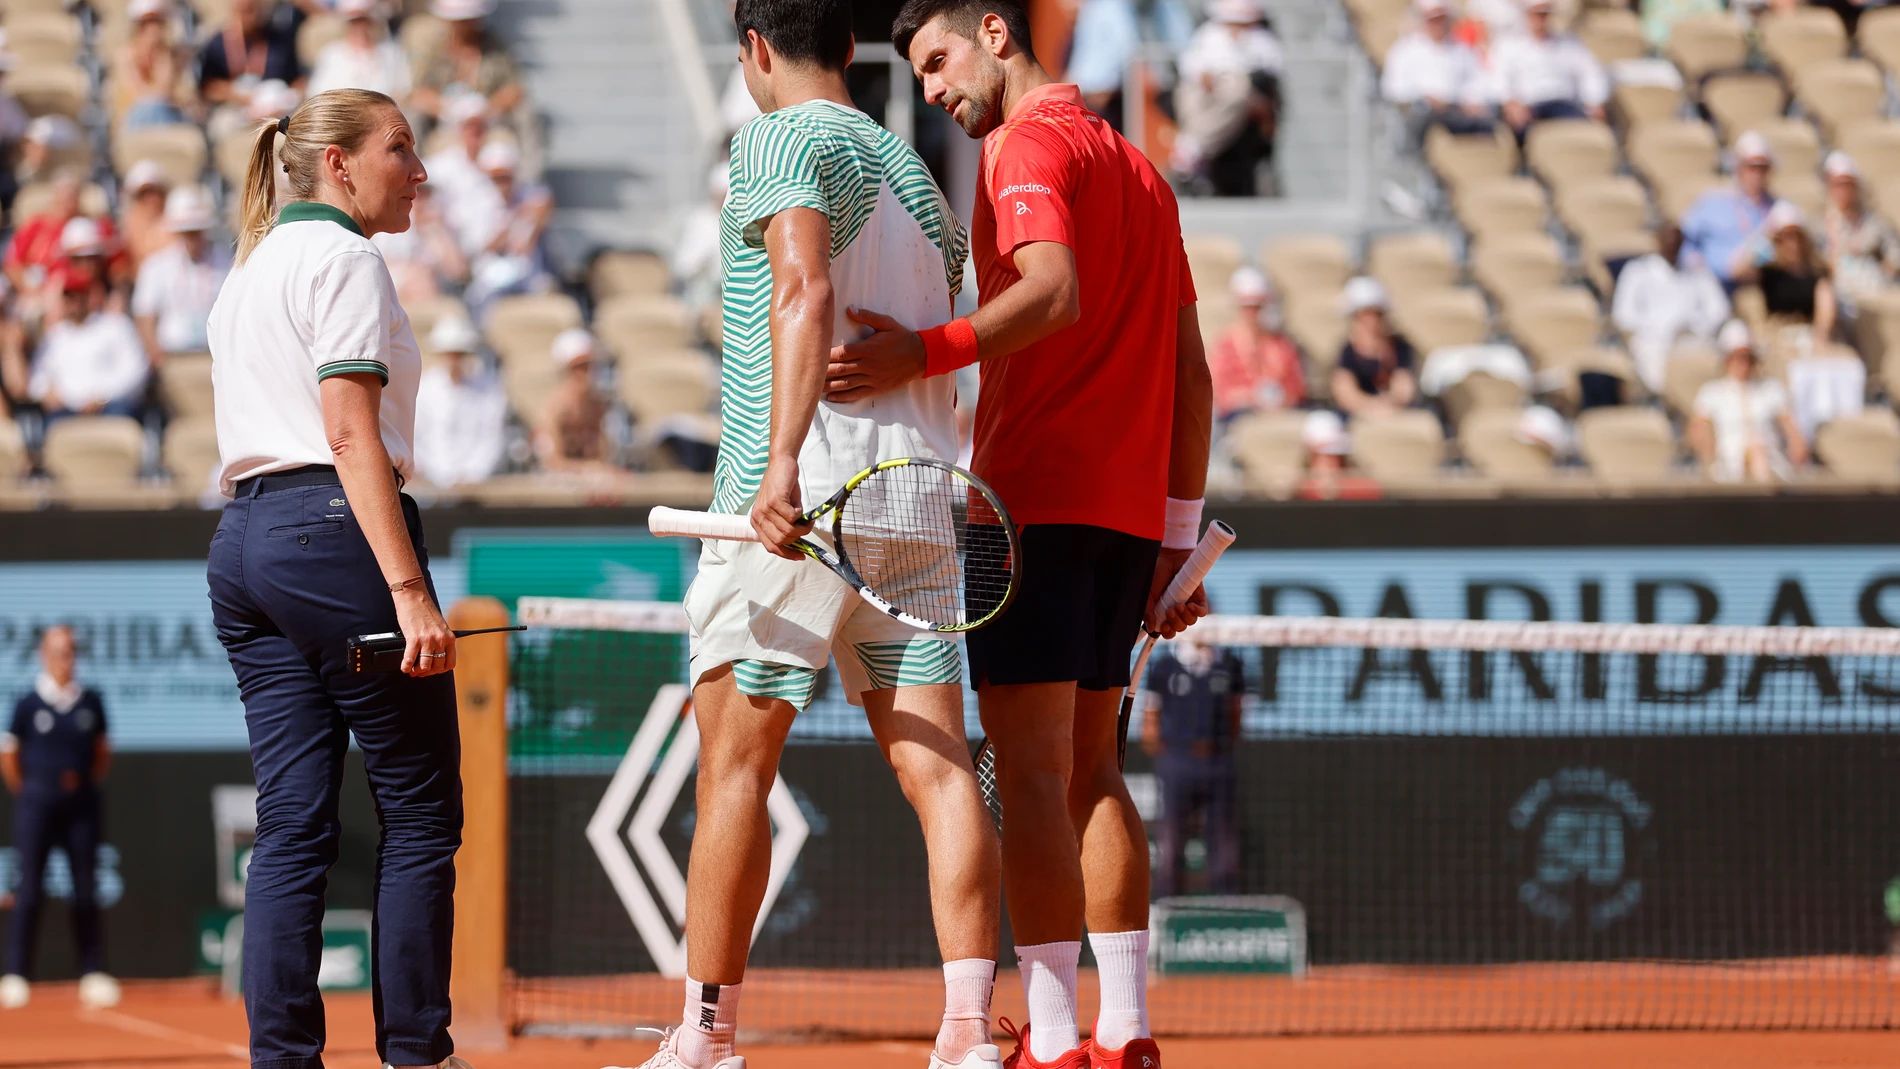 Spain's Carlos Alcaraz, center, walks with the help of Serbia's Novak Djokovic, right, as he is injured during their semifinal match of the French Open tennis tournament at the Roland Garros stadium in Paris, Friday, June 9, 2023. (AP Photo/Jean-Francois Badias)